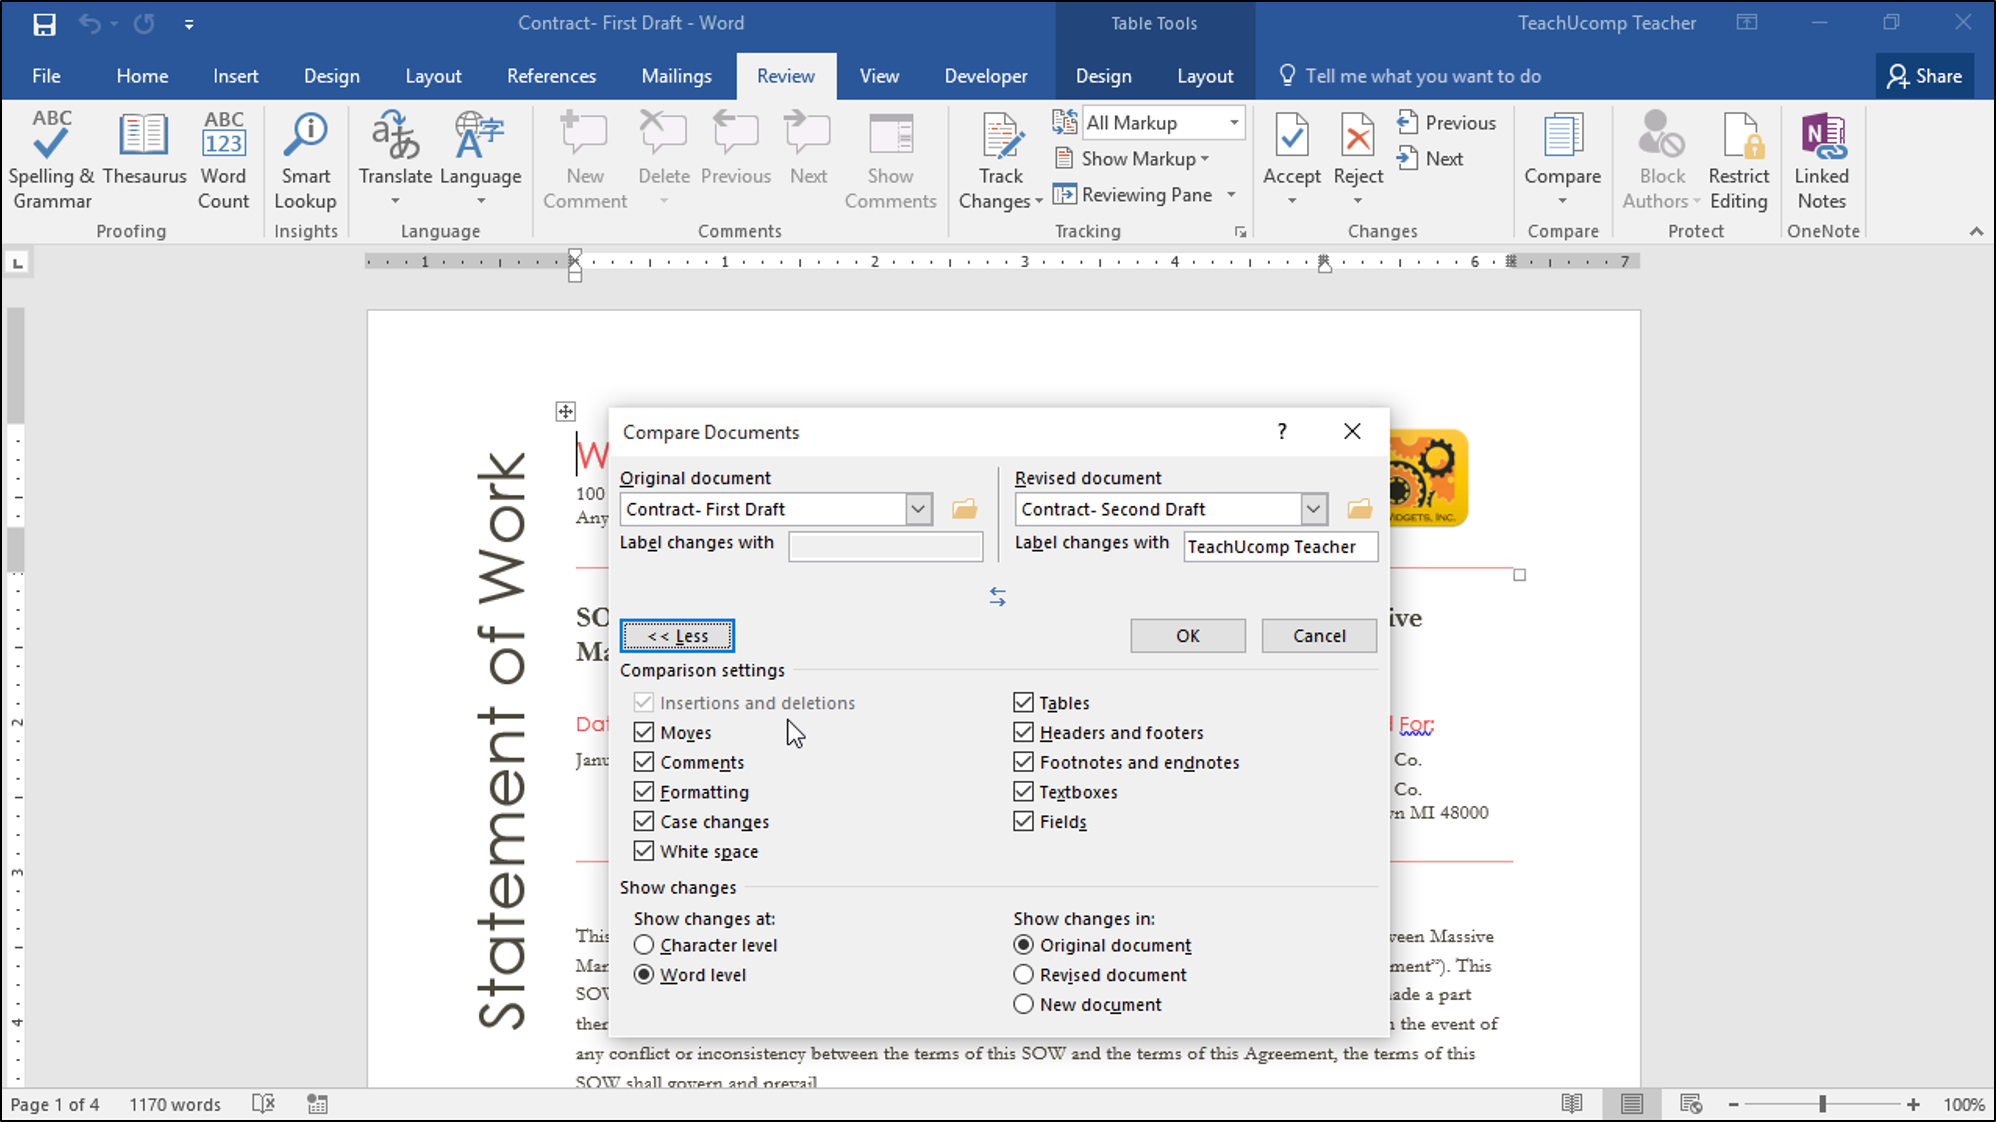 create-word-document-in-windows-10-vbnew